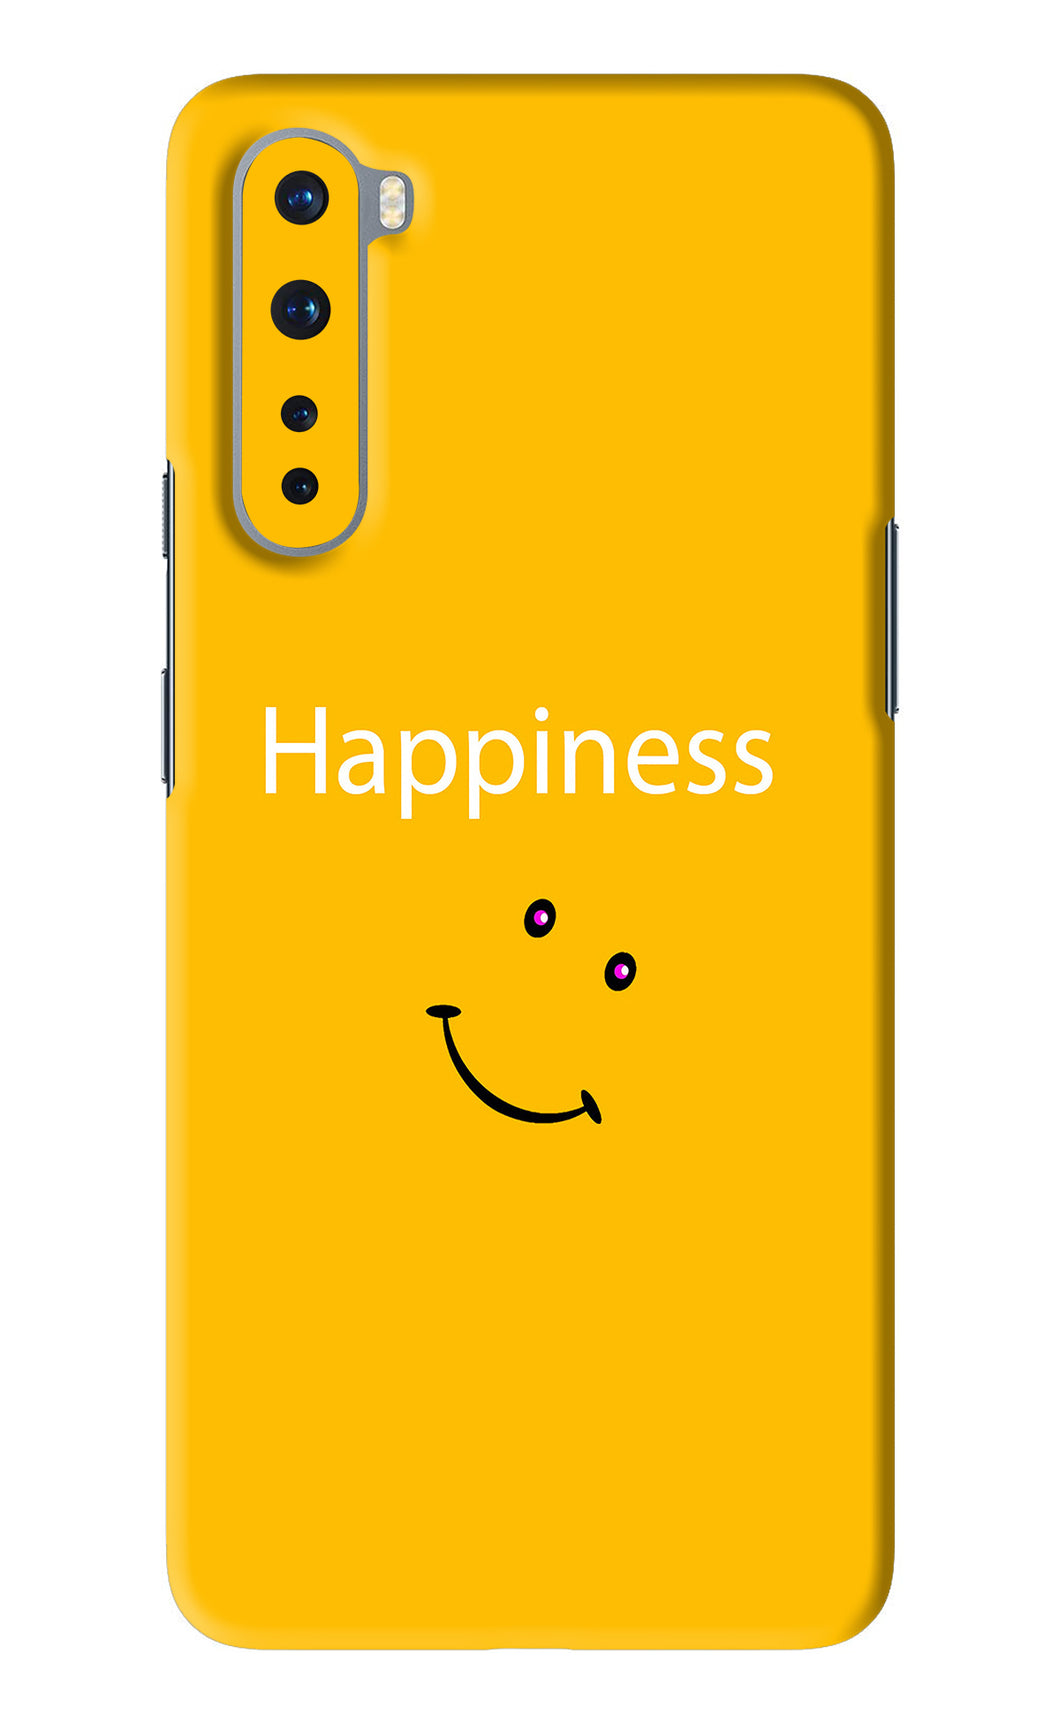 Happiness With Smiley OnePlus Nord Back Skin Wrap